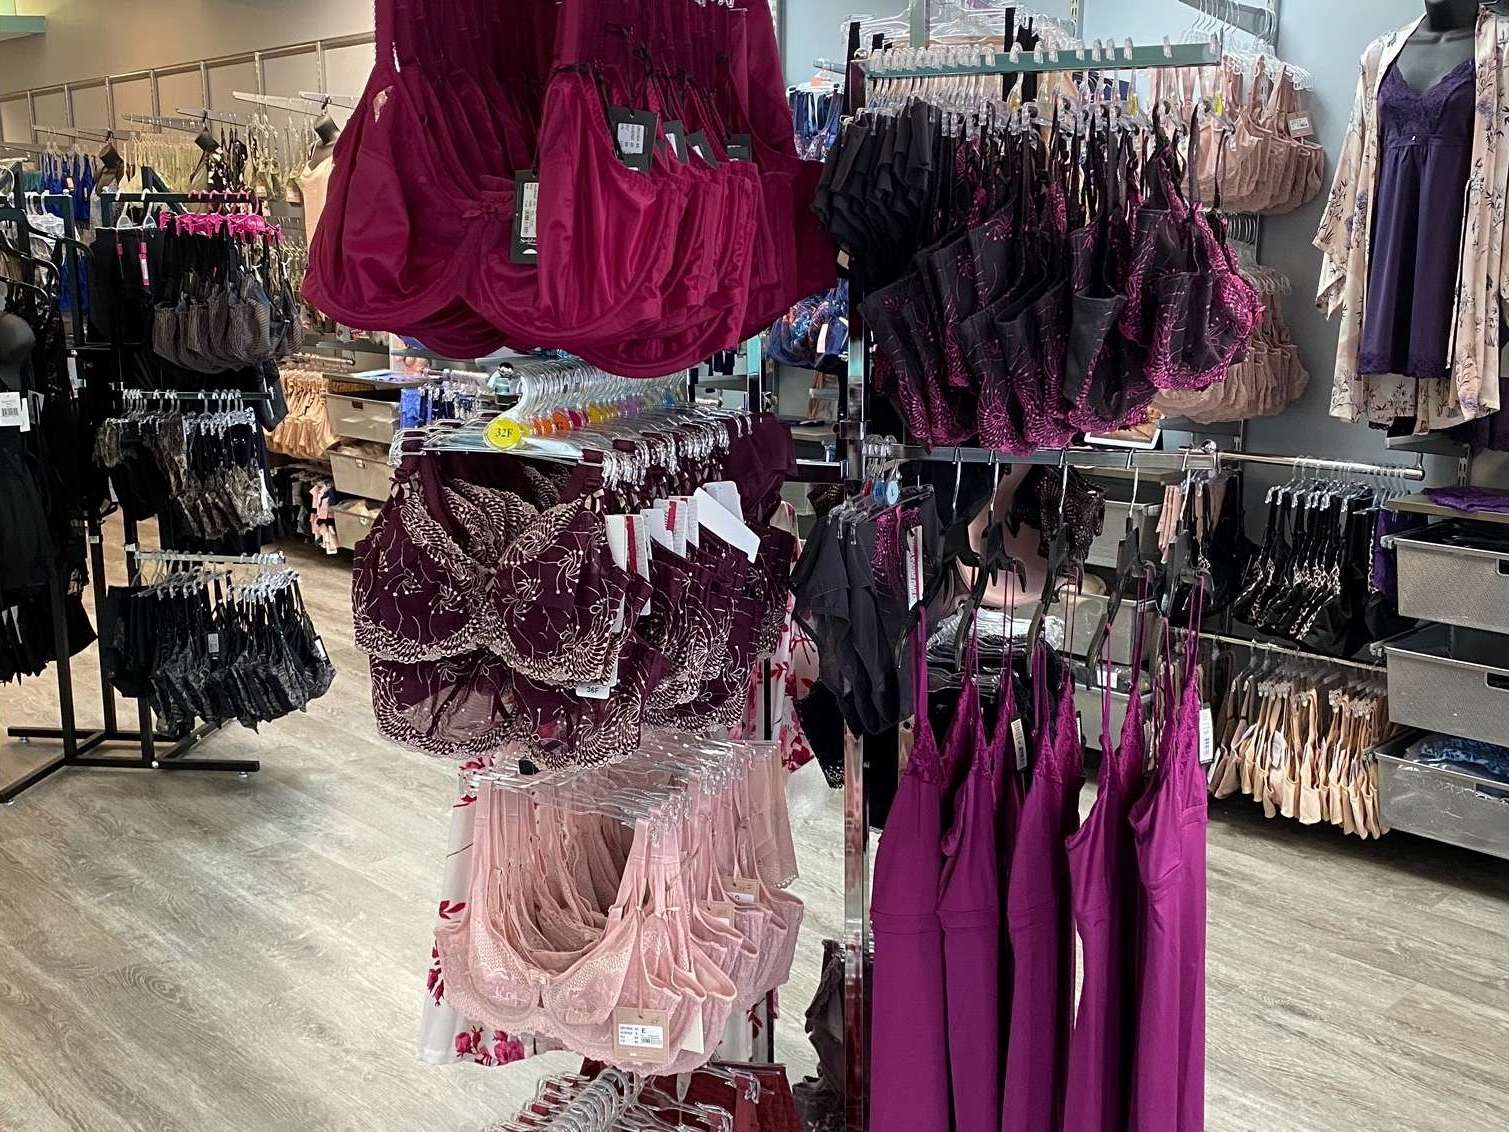 Underwear and lingerie store in Burlington at 75 Middlesex